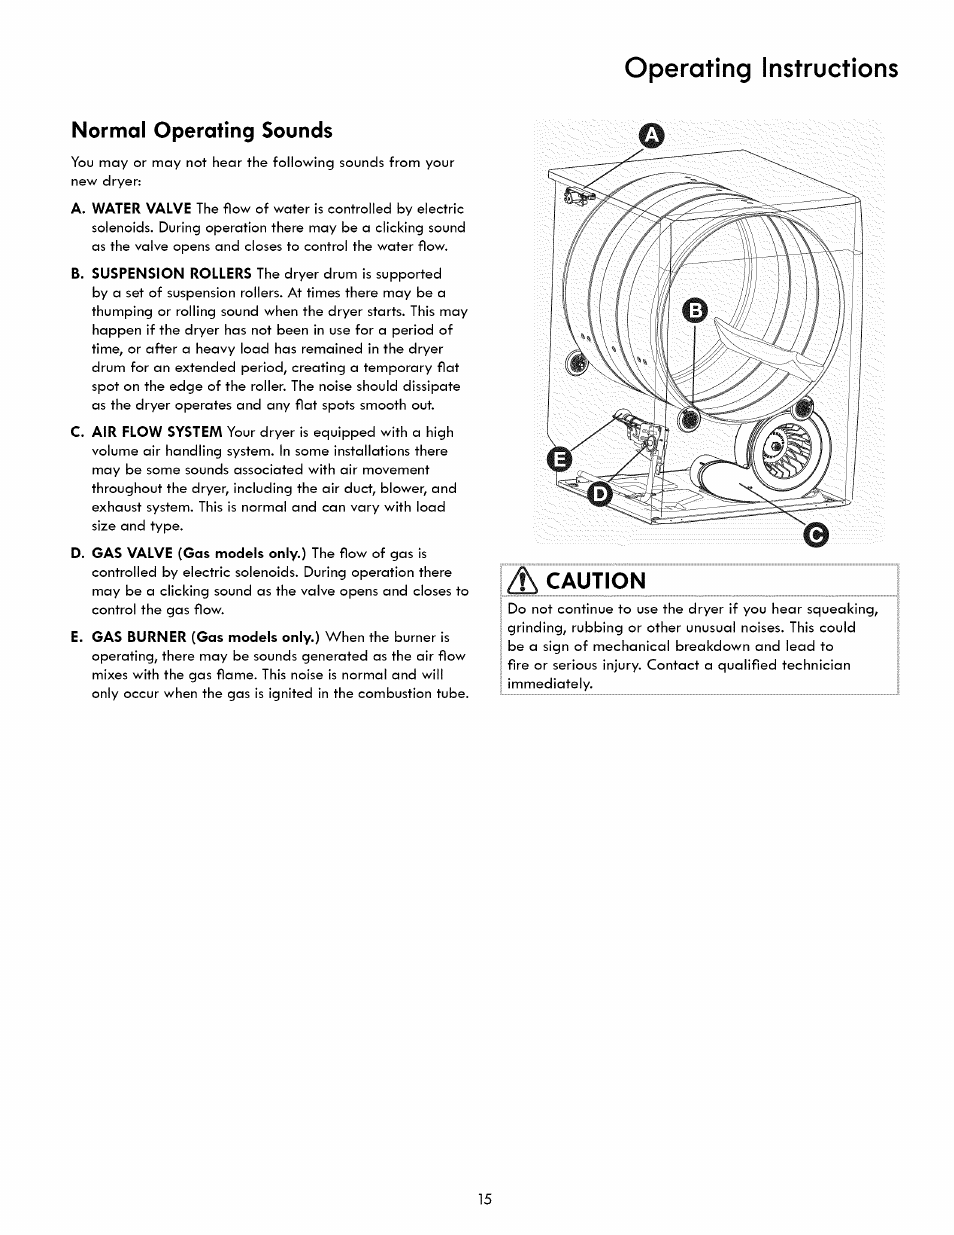 Operating instructions, Normal operating sounds, Caution | Kenmore 417.8413 User Manual | Page 15 / 20